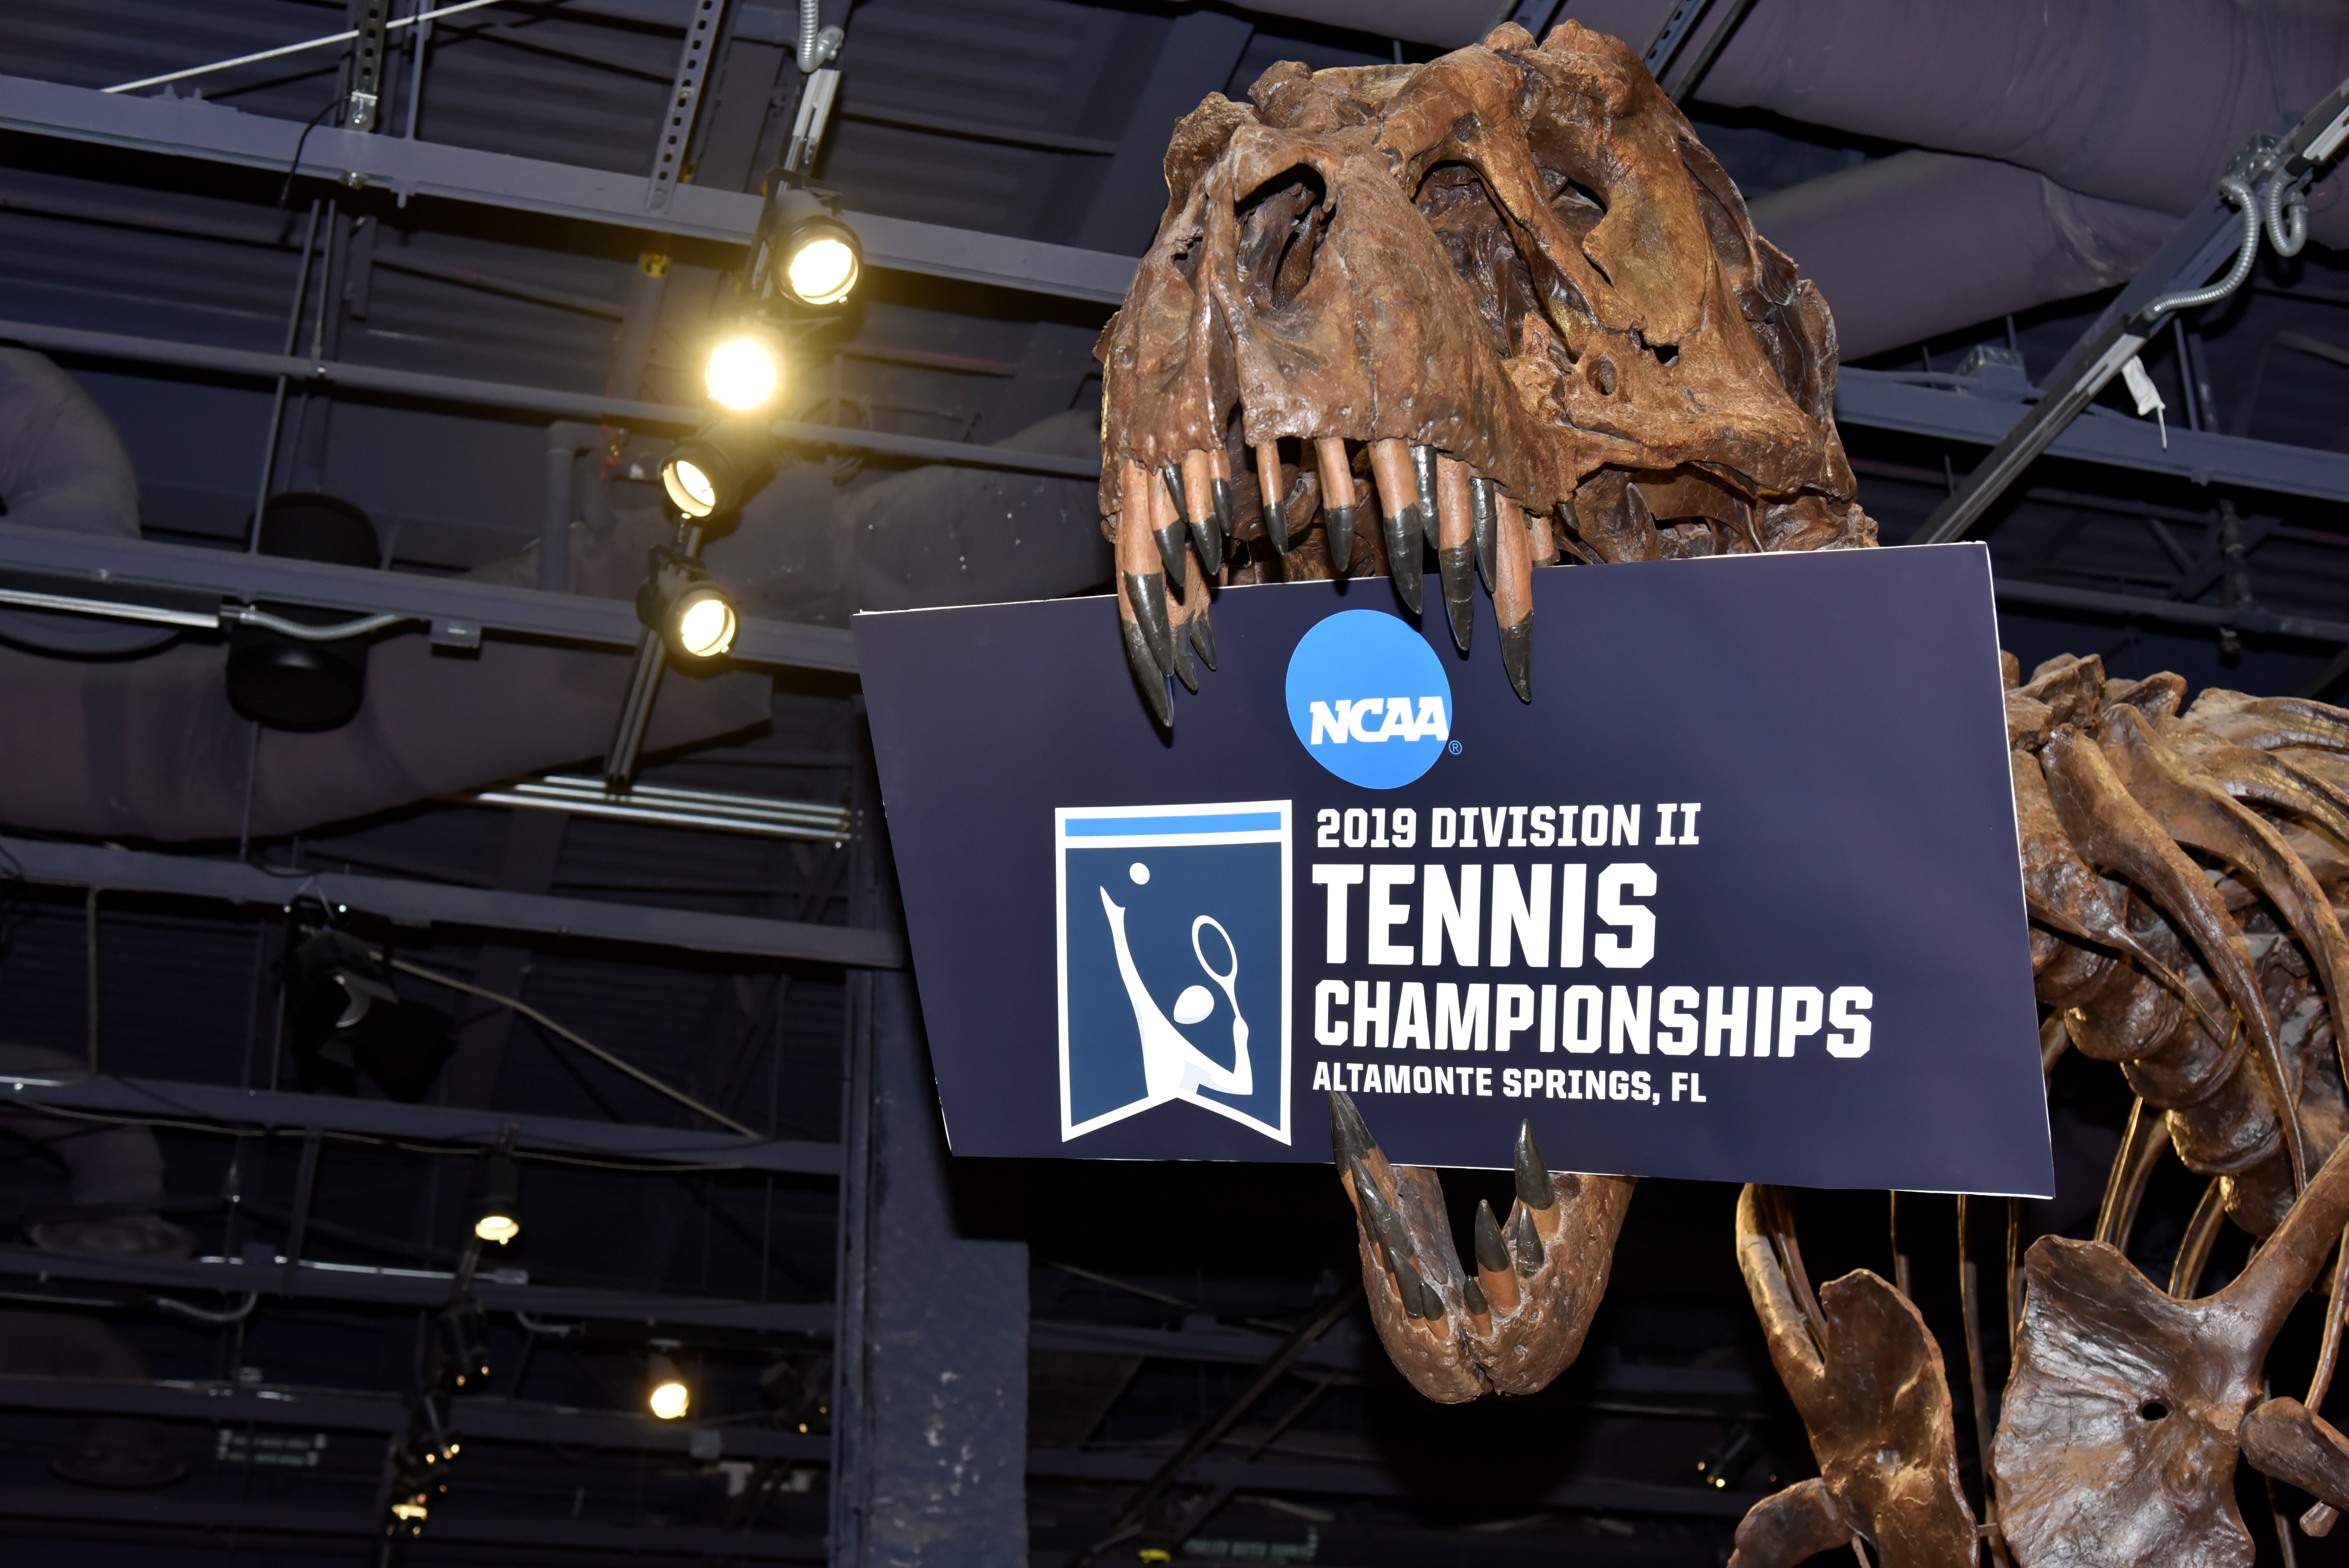 2019 NCAA Division II Tennis Championships Banquet at the Orlando Science Center